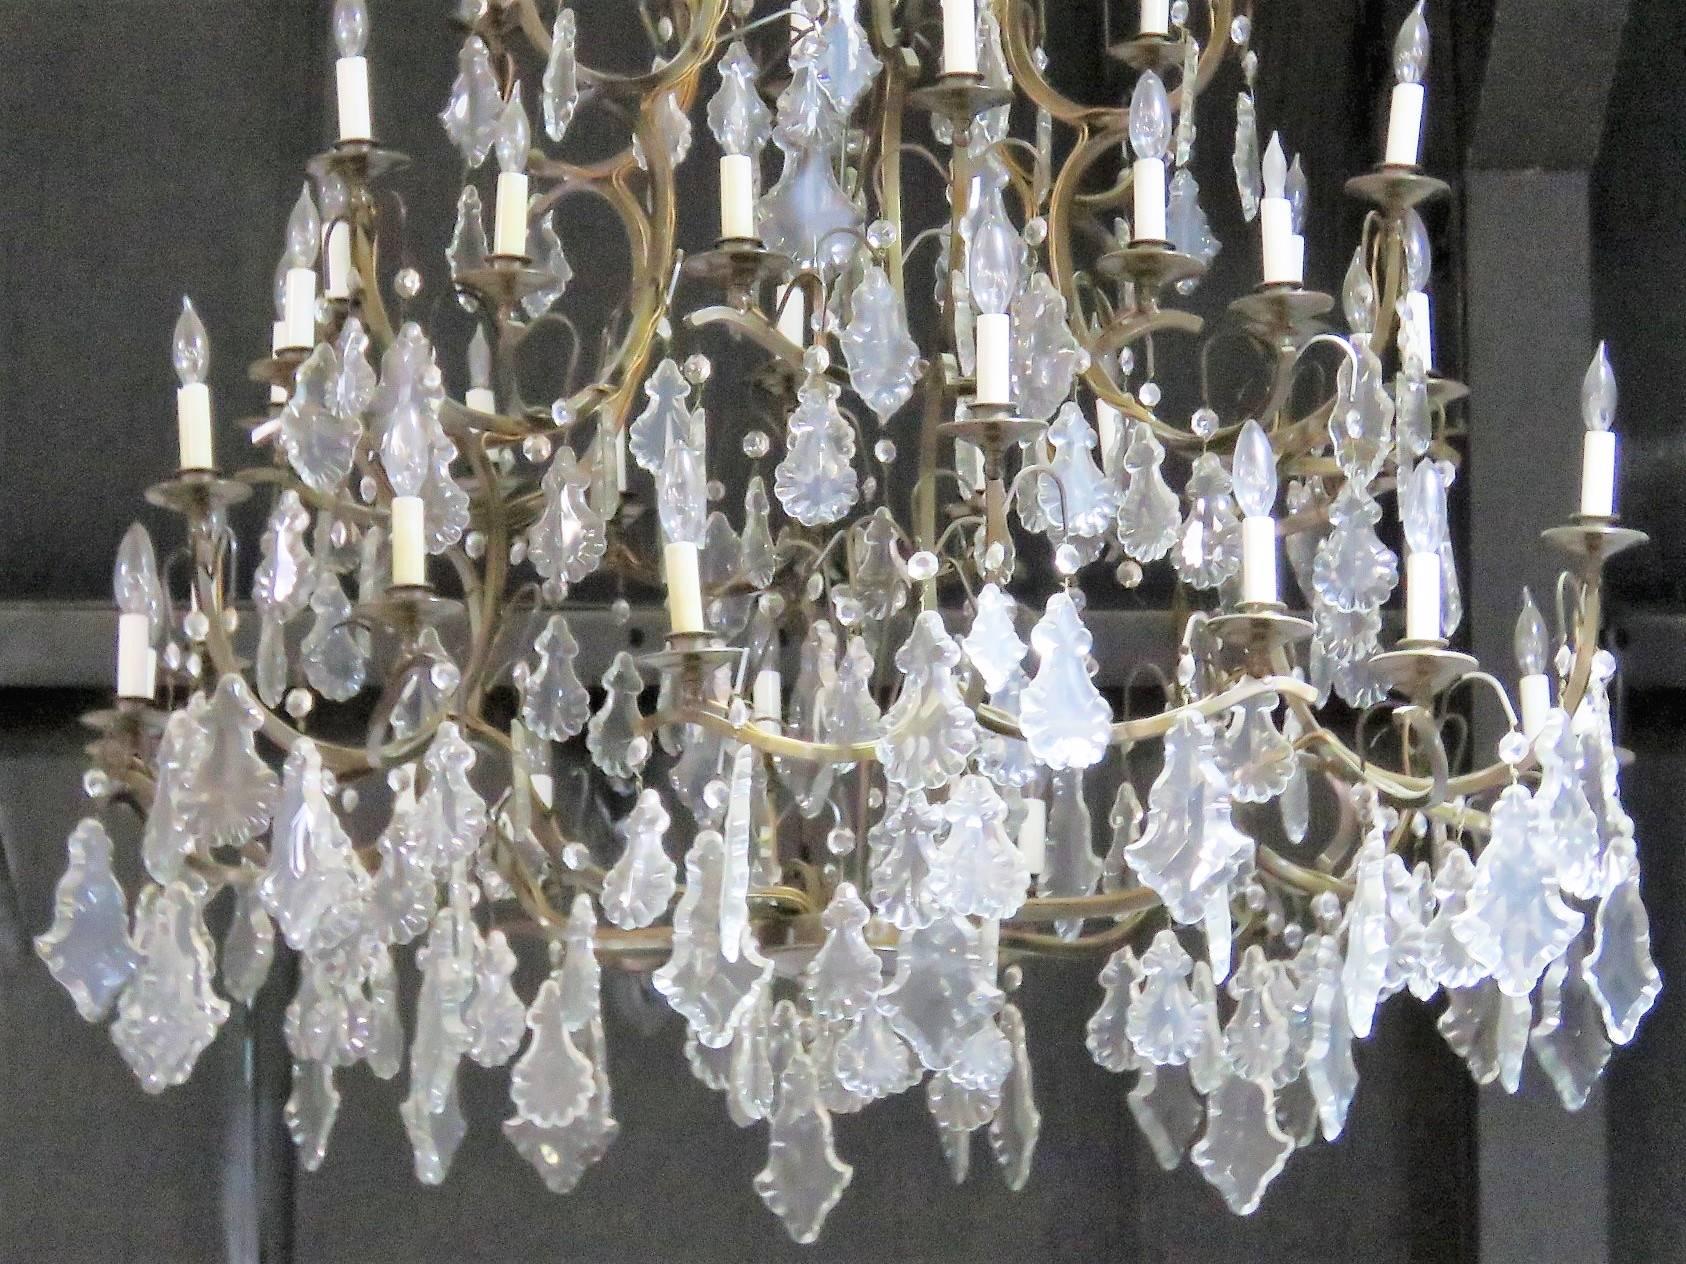 This is a magnificent chandelier from the renowned Philadelphia Restaurant Le Bec Fin. Large crystal chandelier from the legendary Le Bec Fin restaurant in Philadelphia. This is the perfect chandelier for any room in your home or matched with